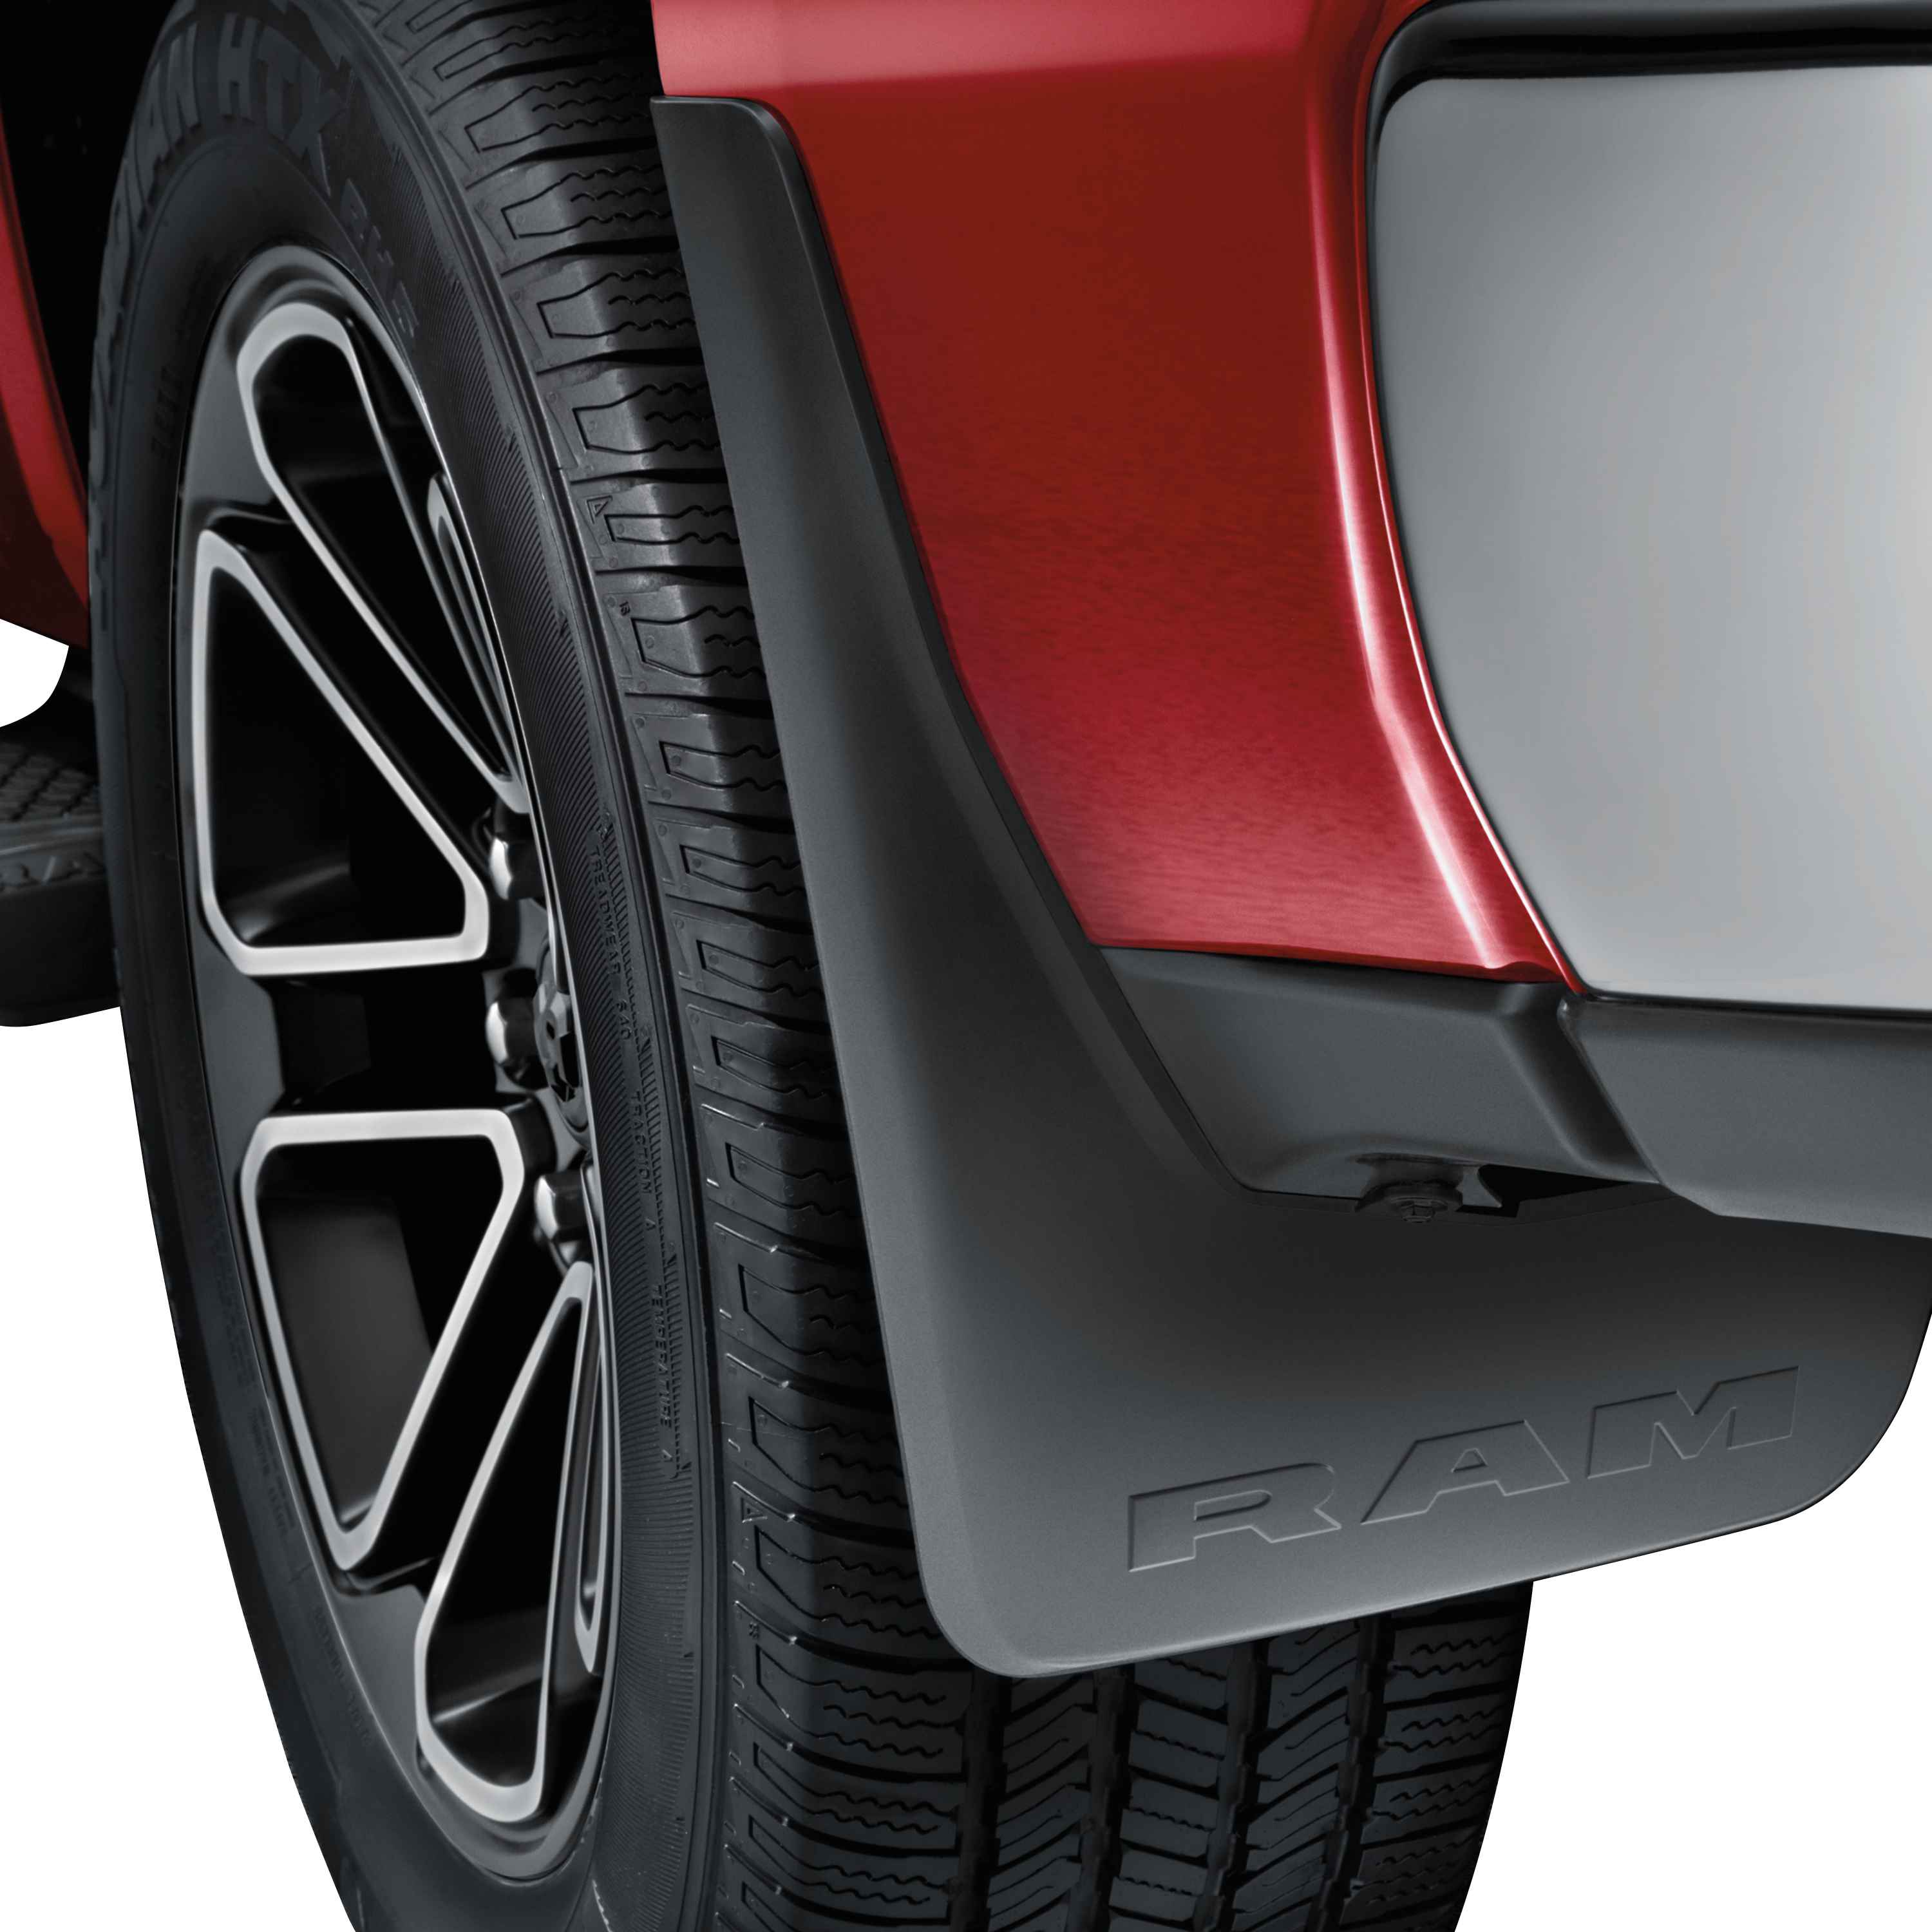 OEM 2020 Ram 1500 Splash Guards, Heavy-Duty Rubber (Rear) for Vehicles with production Fender Flares (Part #82216216AA)